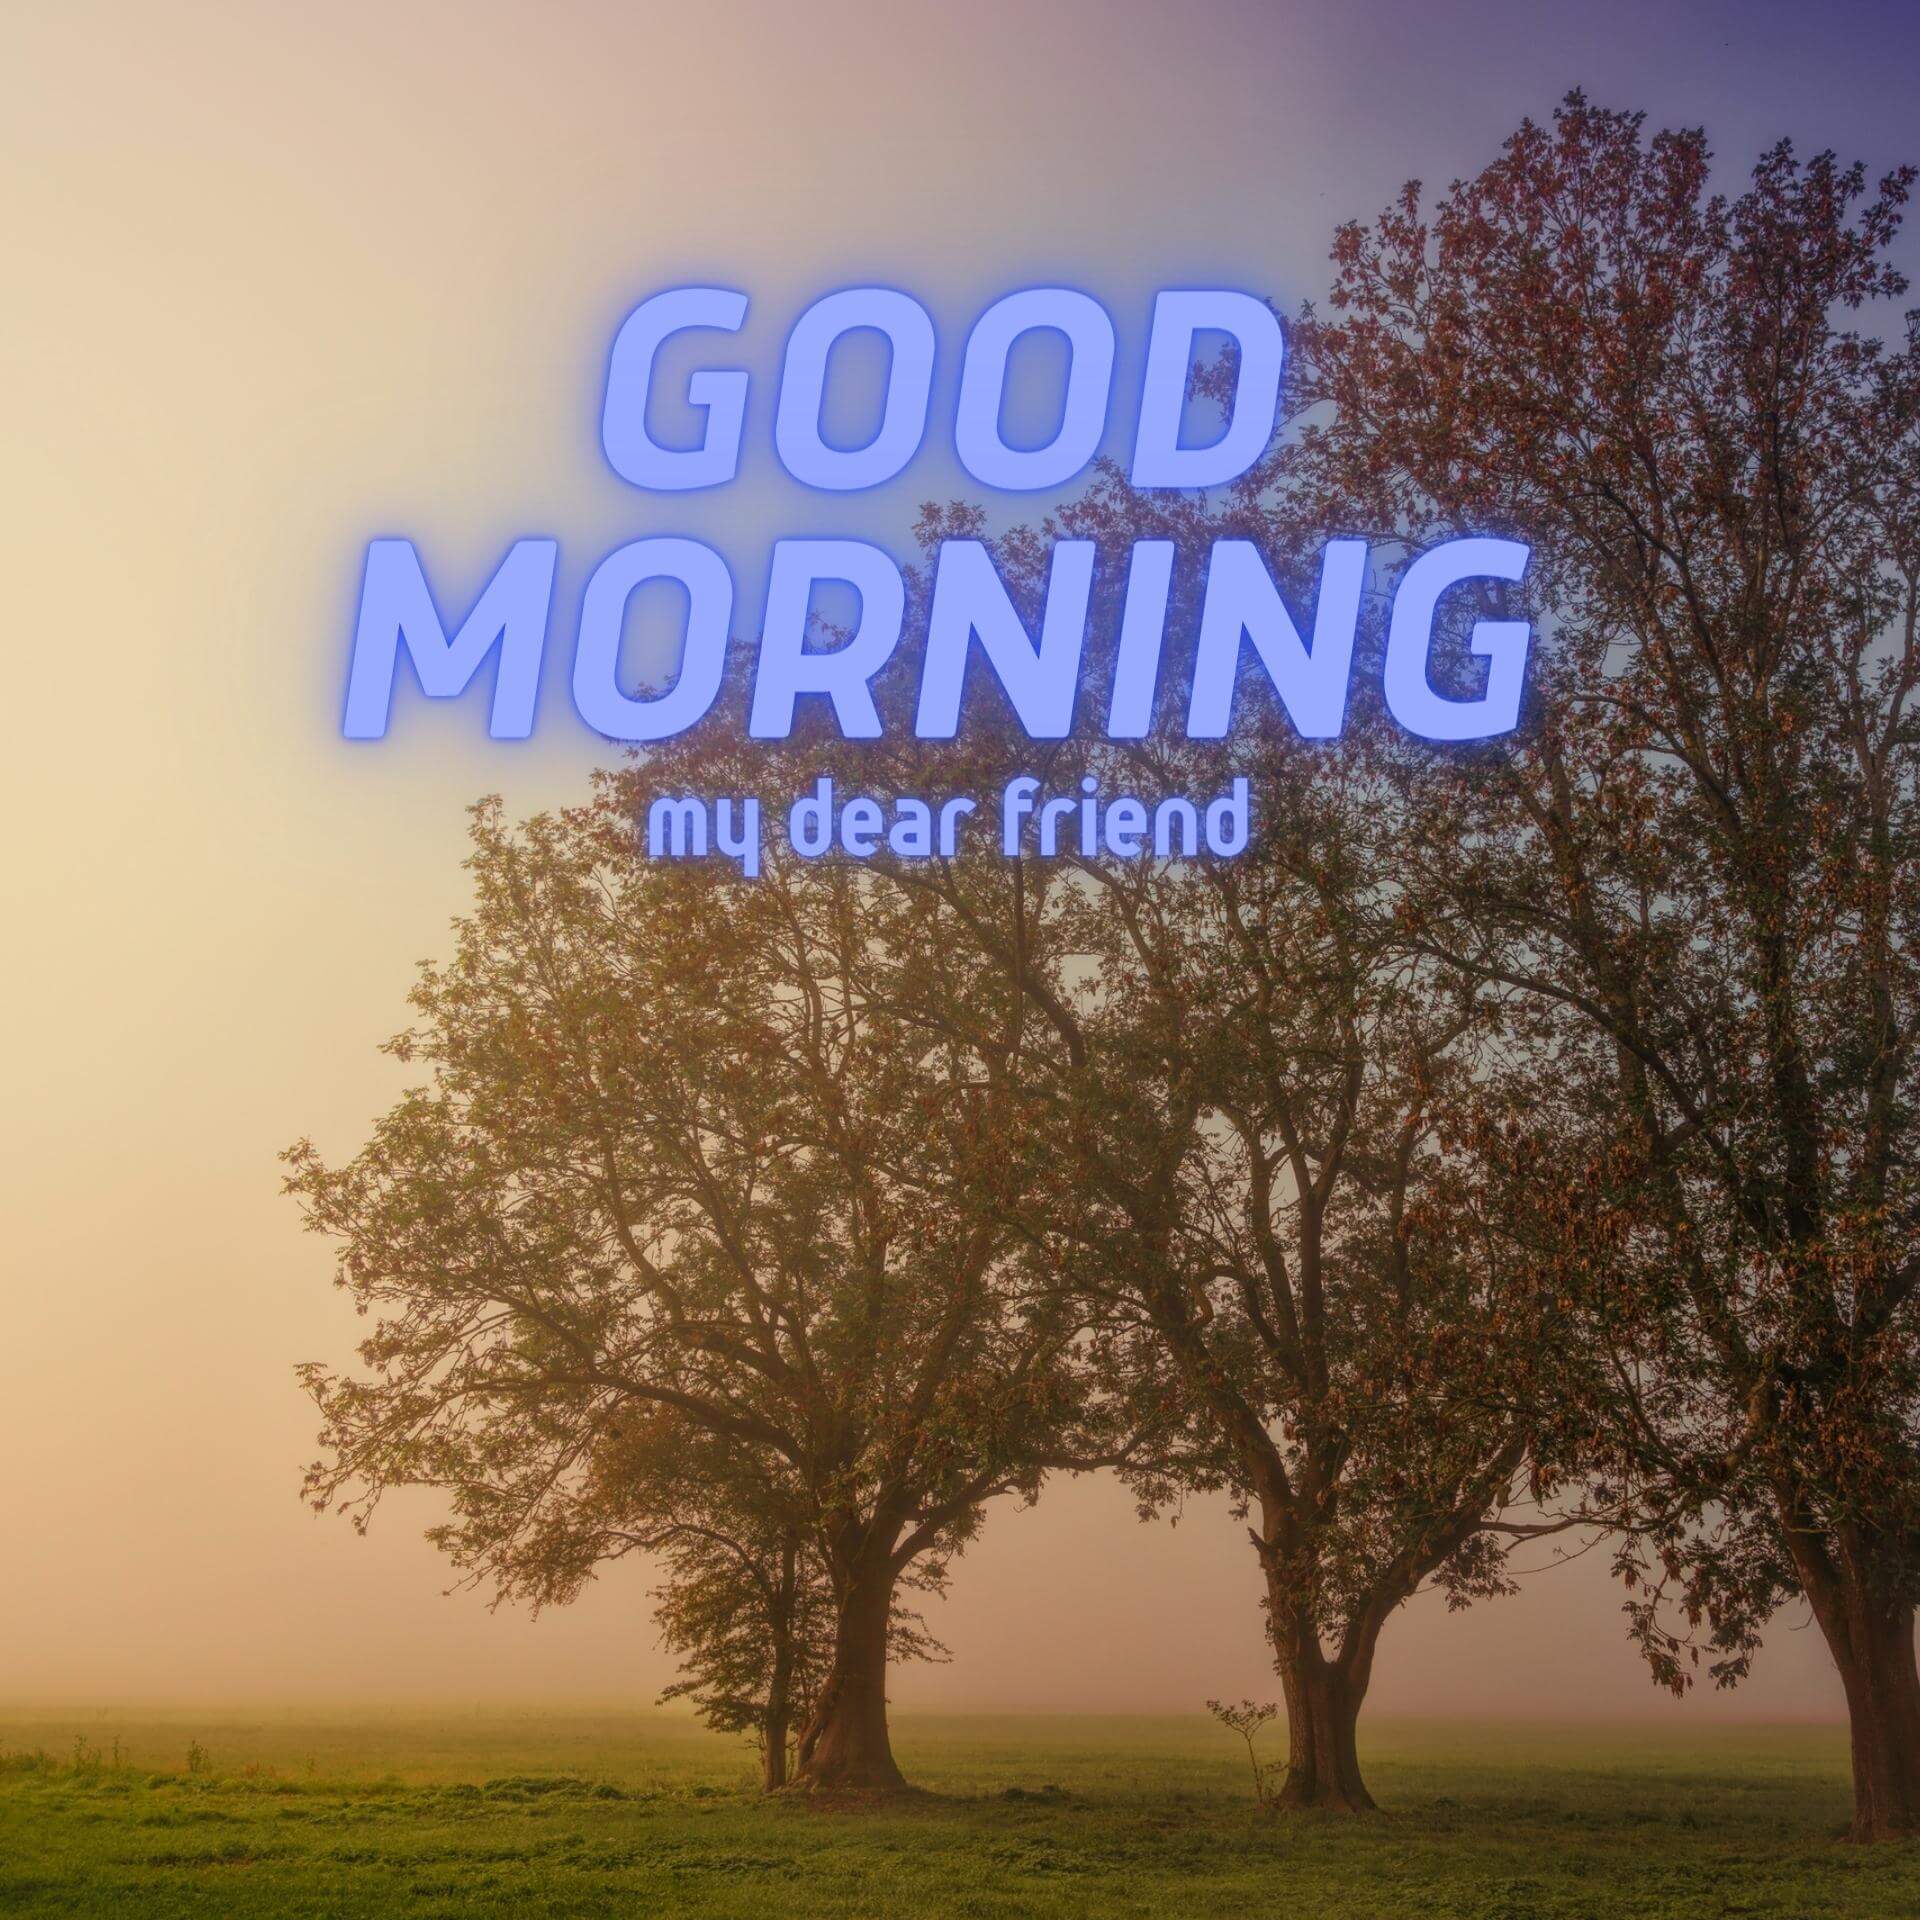 Good Morning Wallpaper Images Download for Best Friend